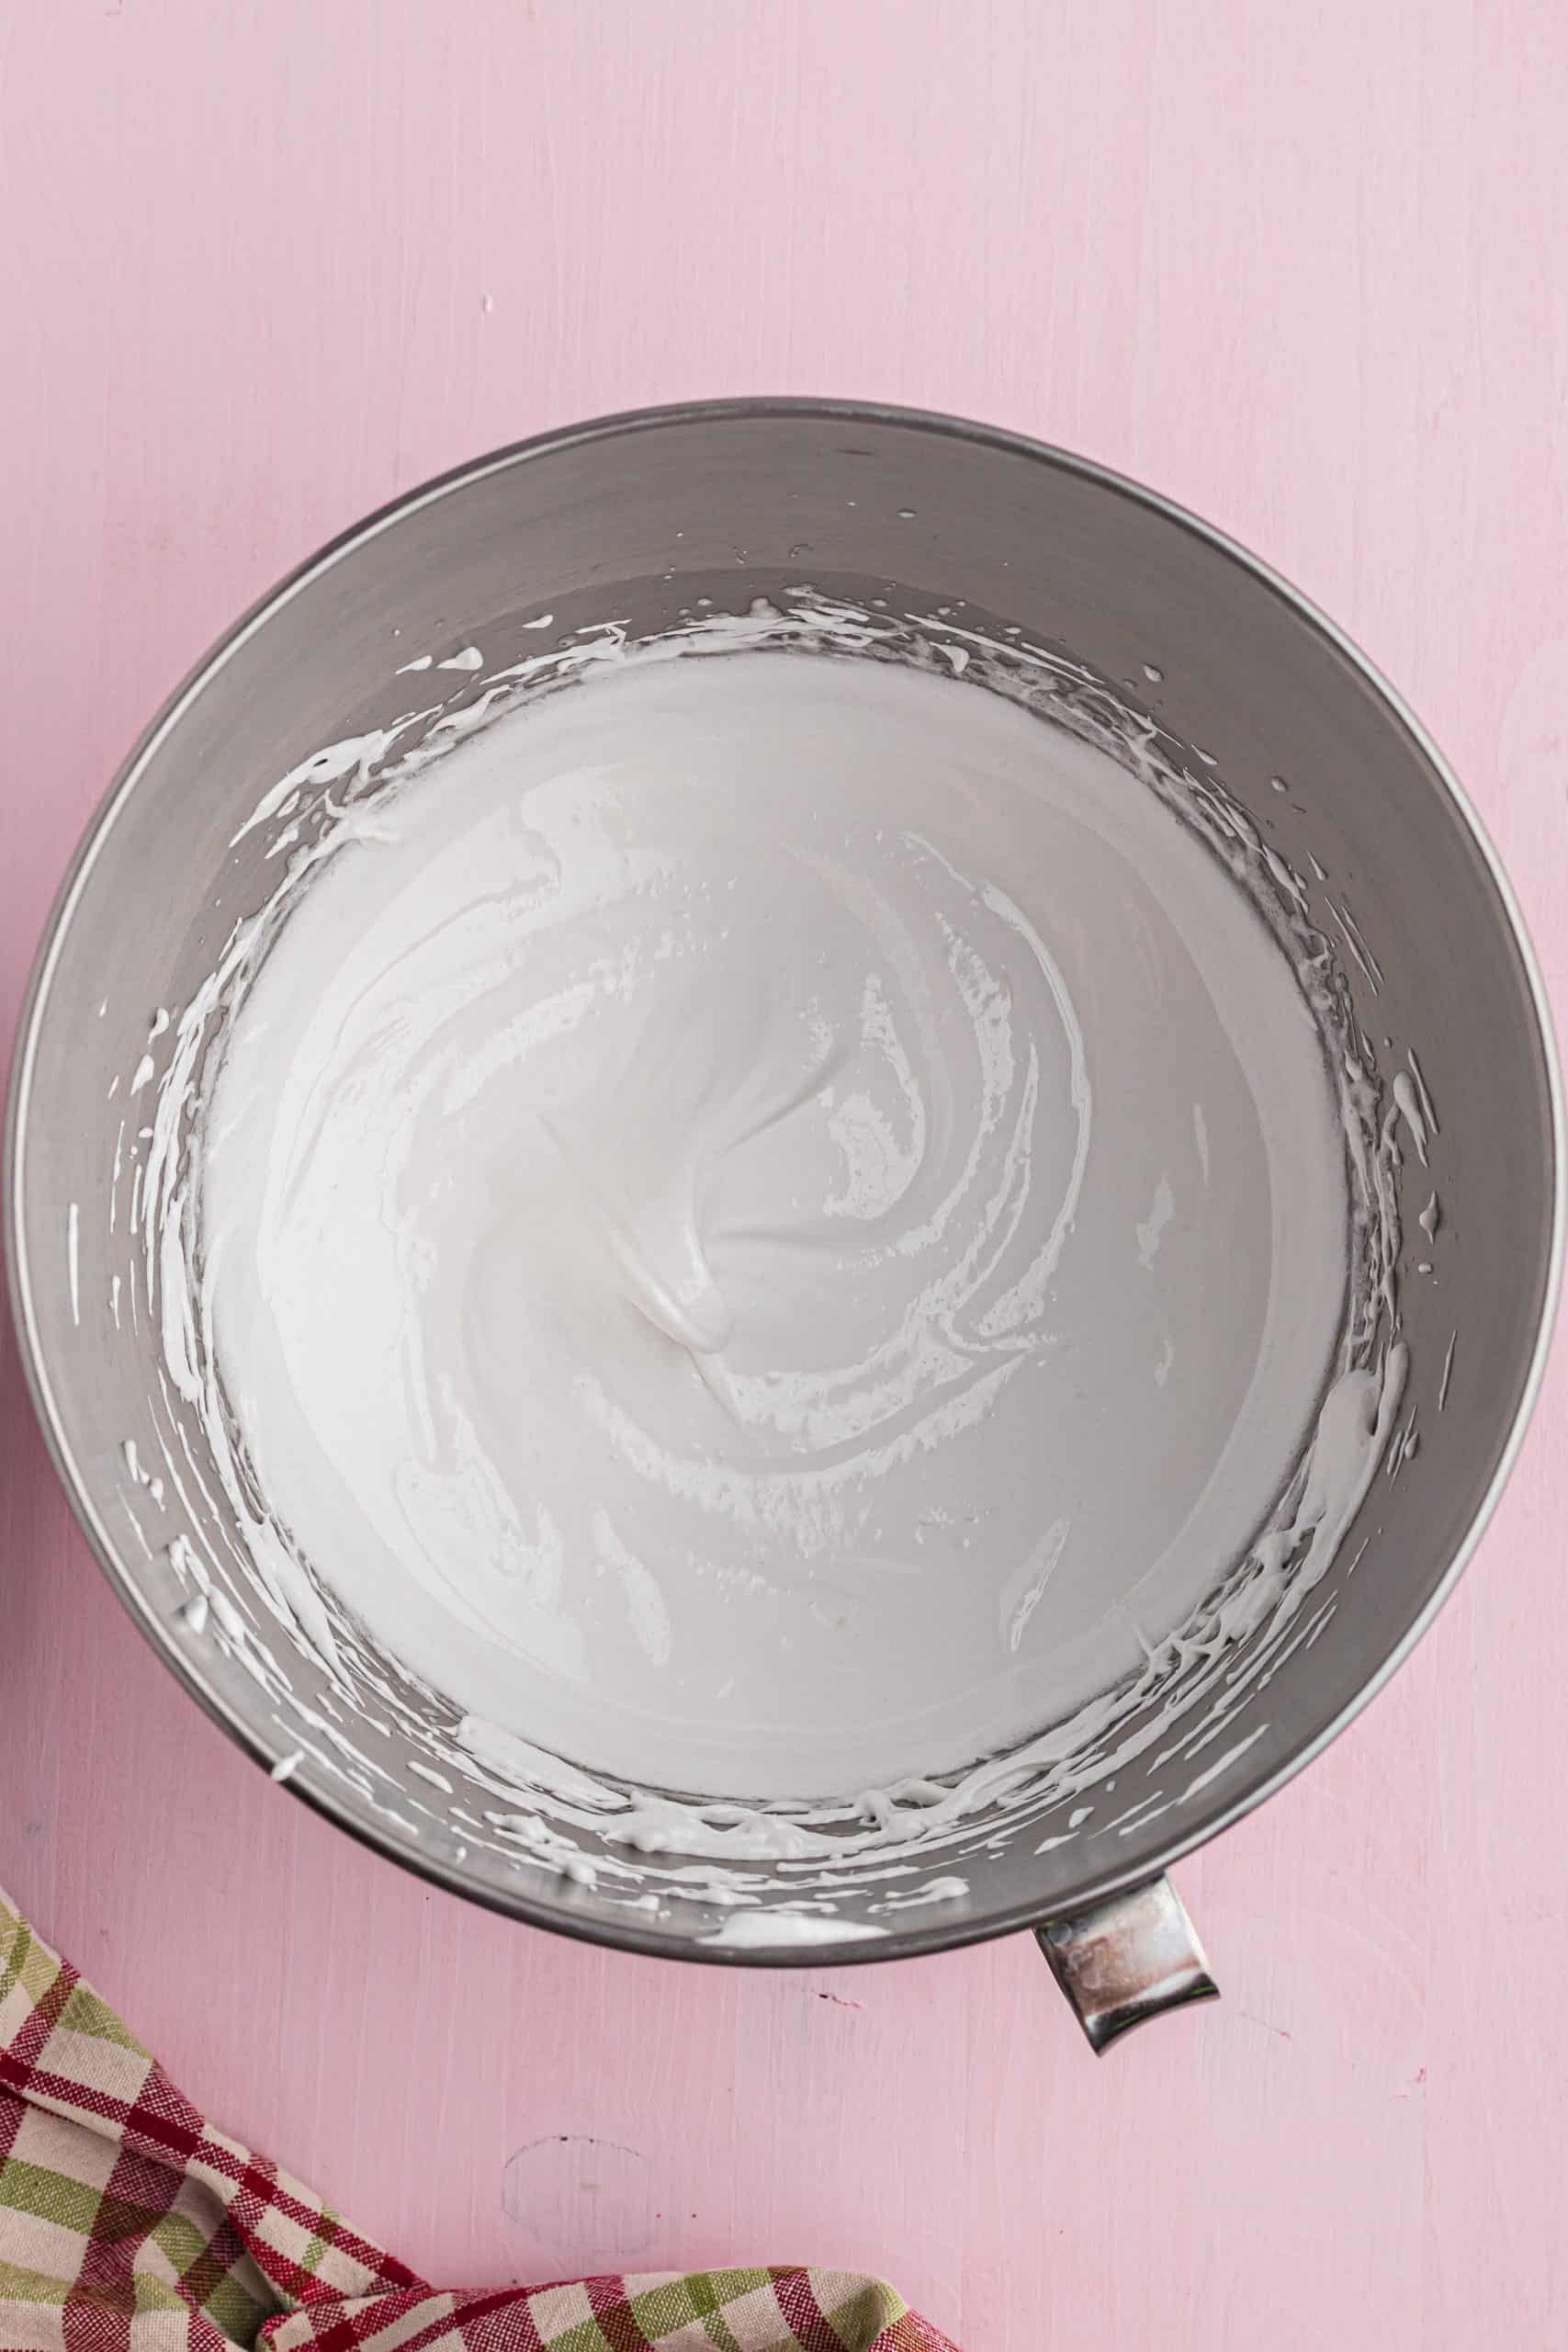 creamy and thick egg whites with sugar in a stainless steel mixing bowl.